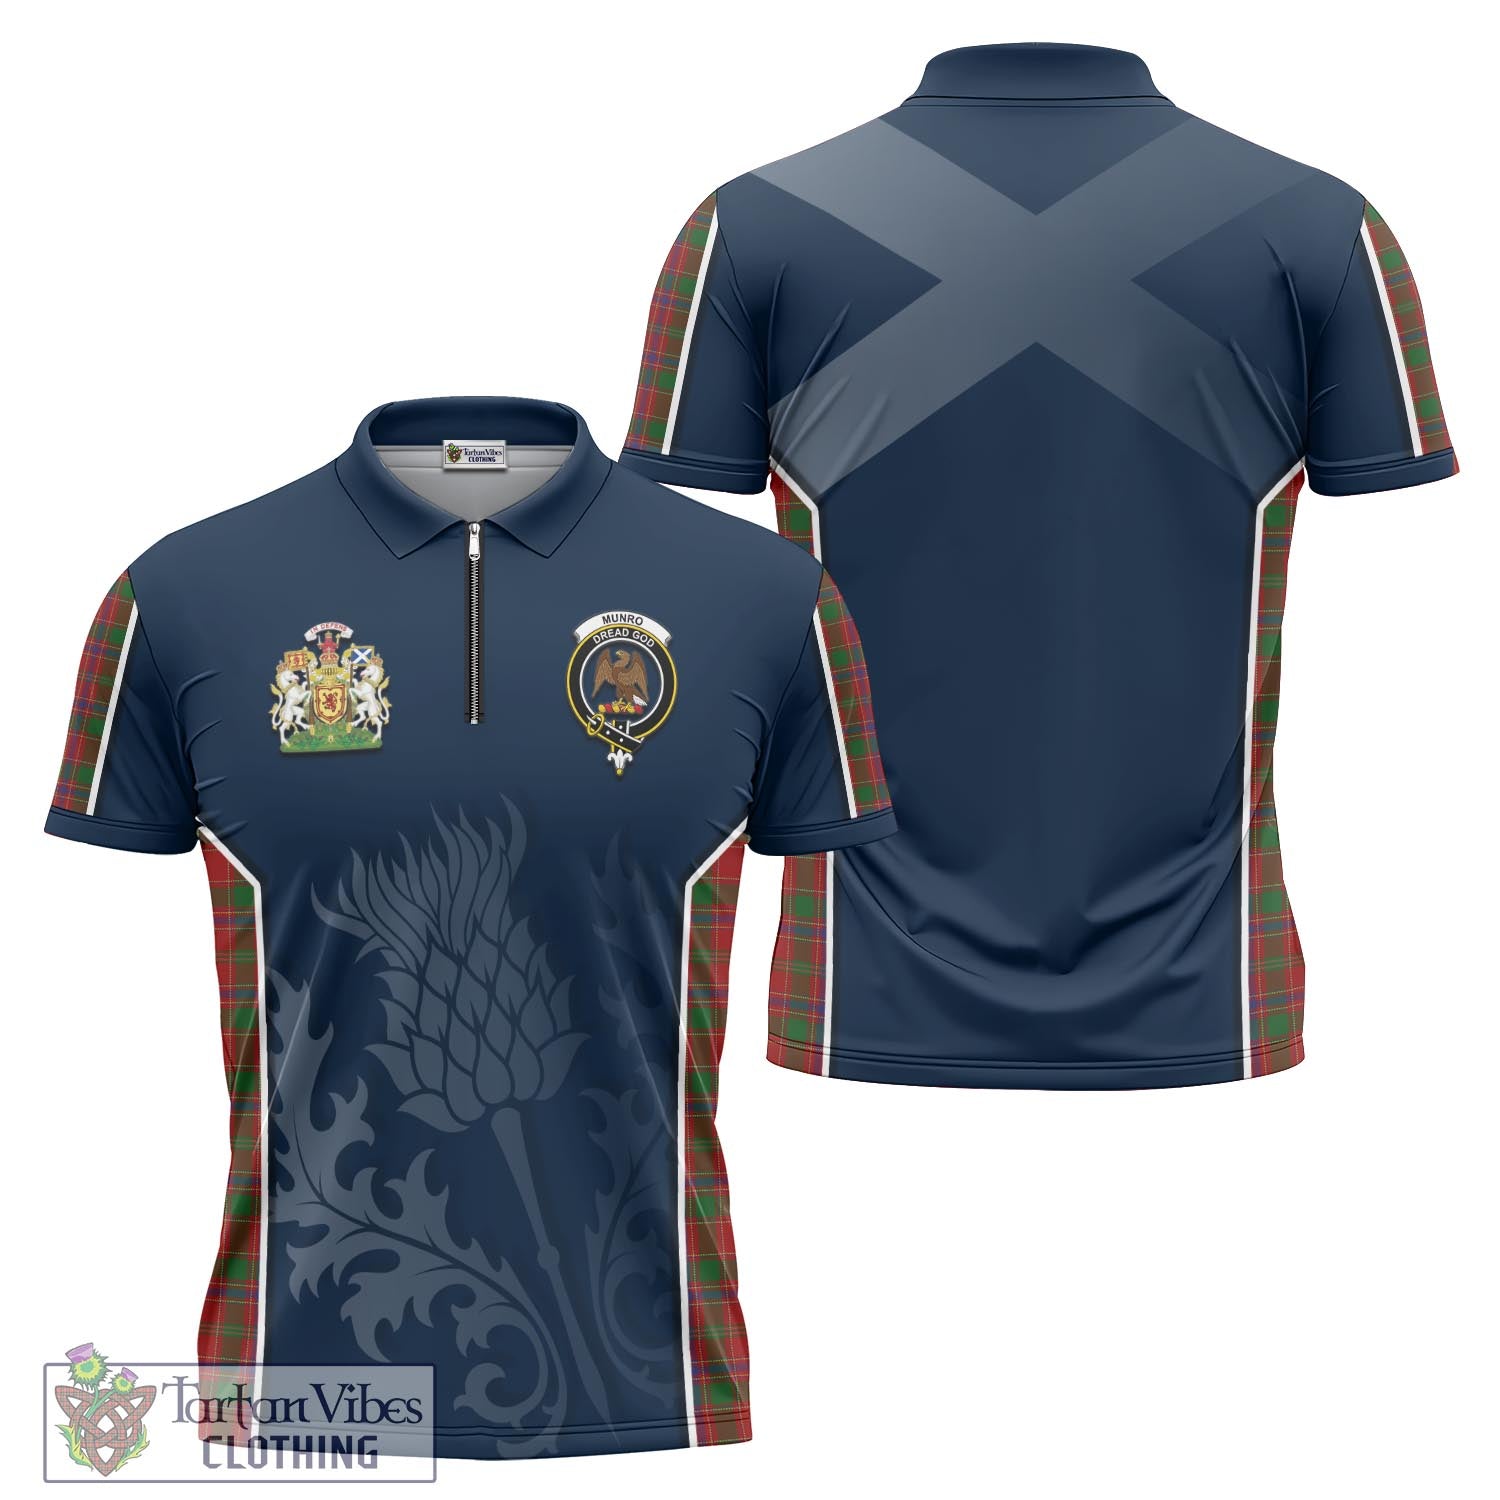 Tartan Vibes Clothing Munro Tartan Zipper Polo Shirt with Family Crest and Scottish Thistle Vibes Sport Style